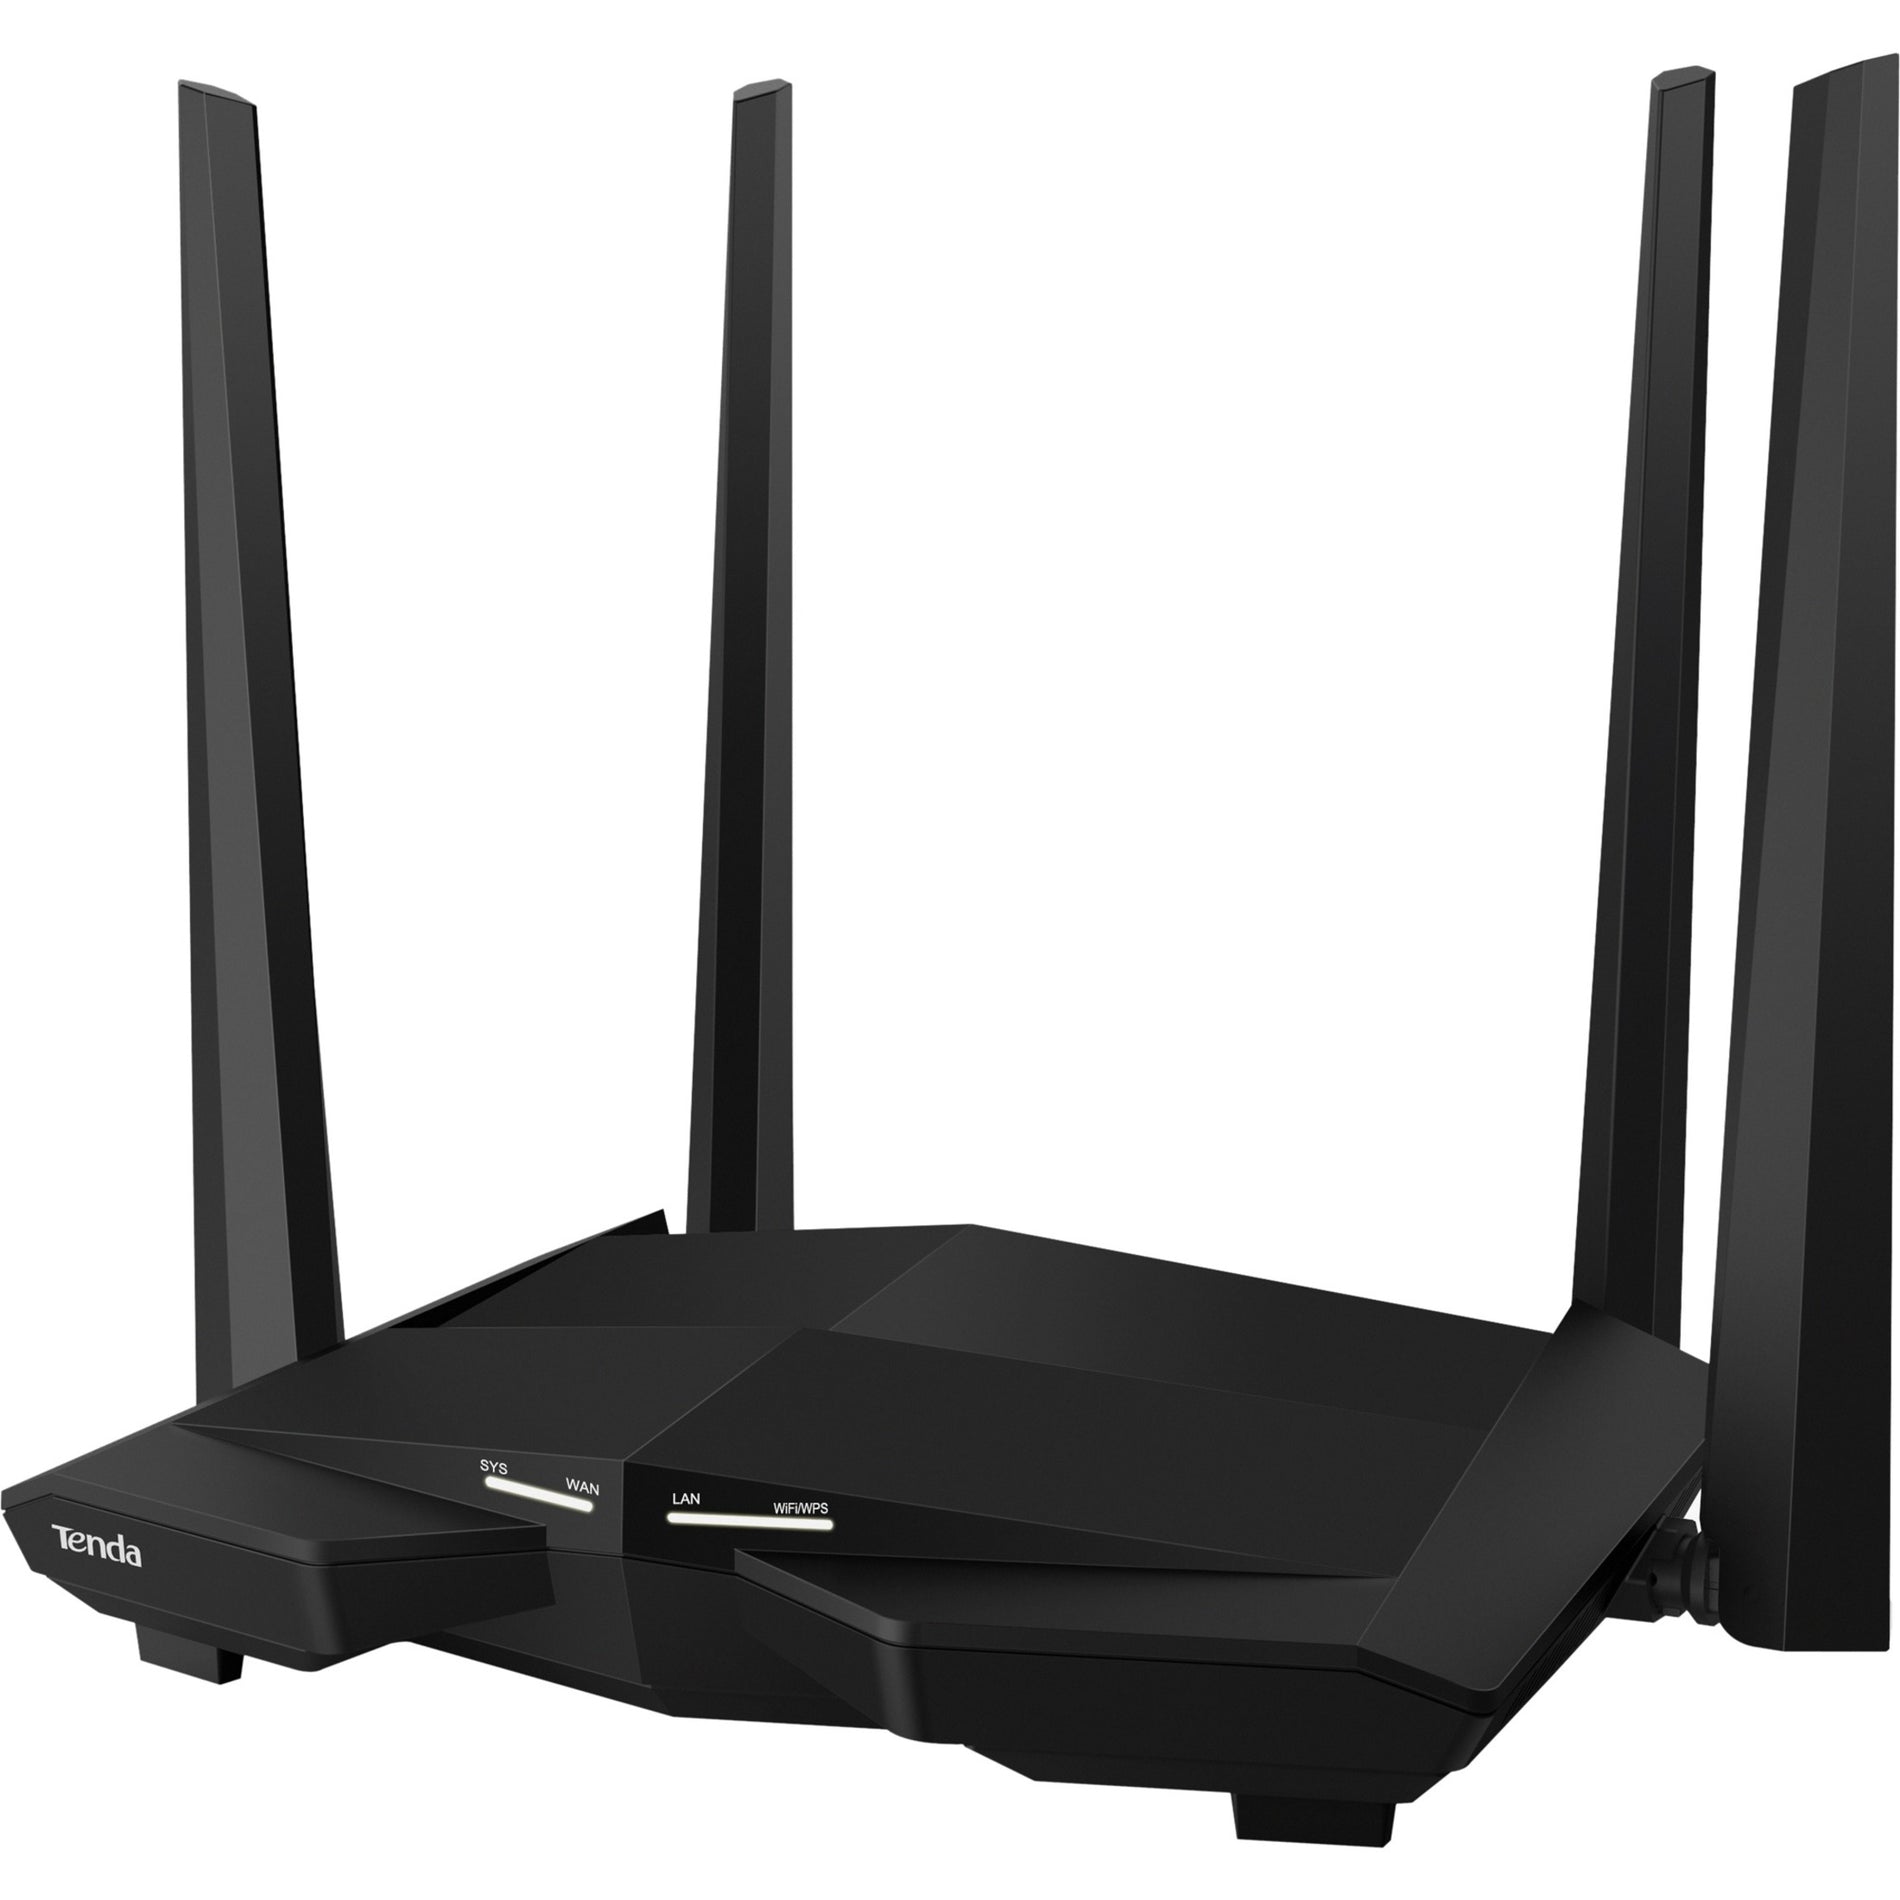 Tenda AC10 AC1200 Smart Dual-Band Wireless Router, Wi-Fi 5, Gigabit Ethernet, VPN Supported